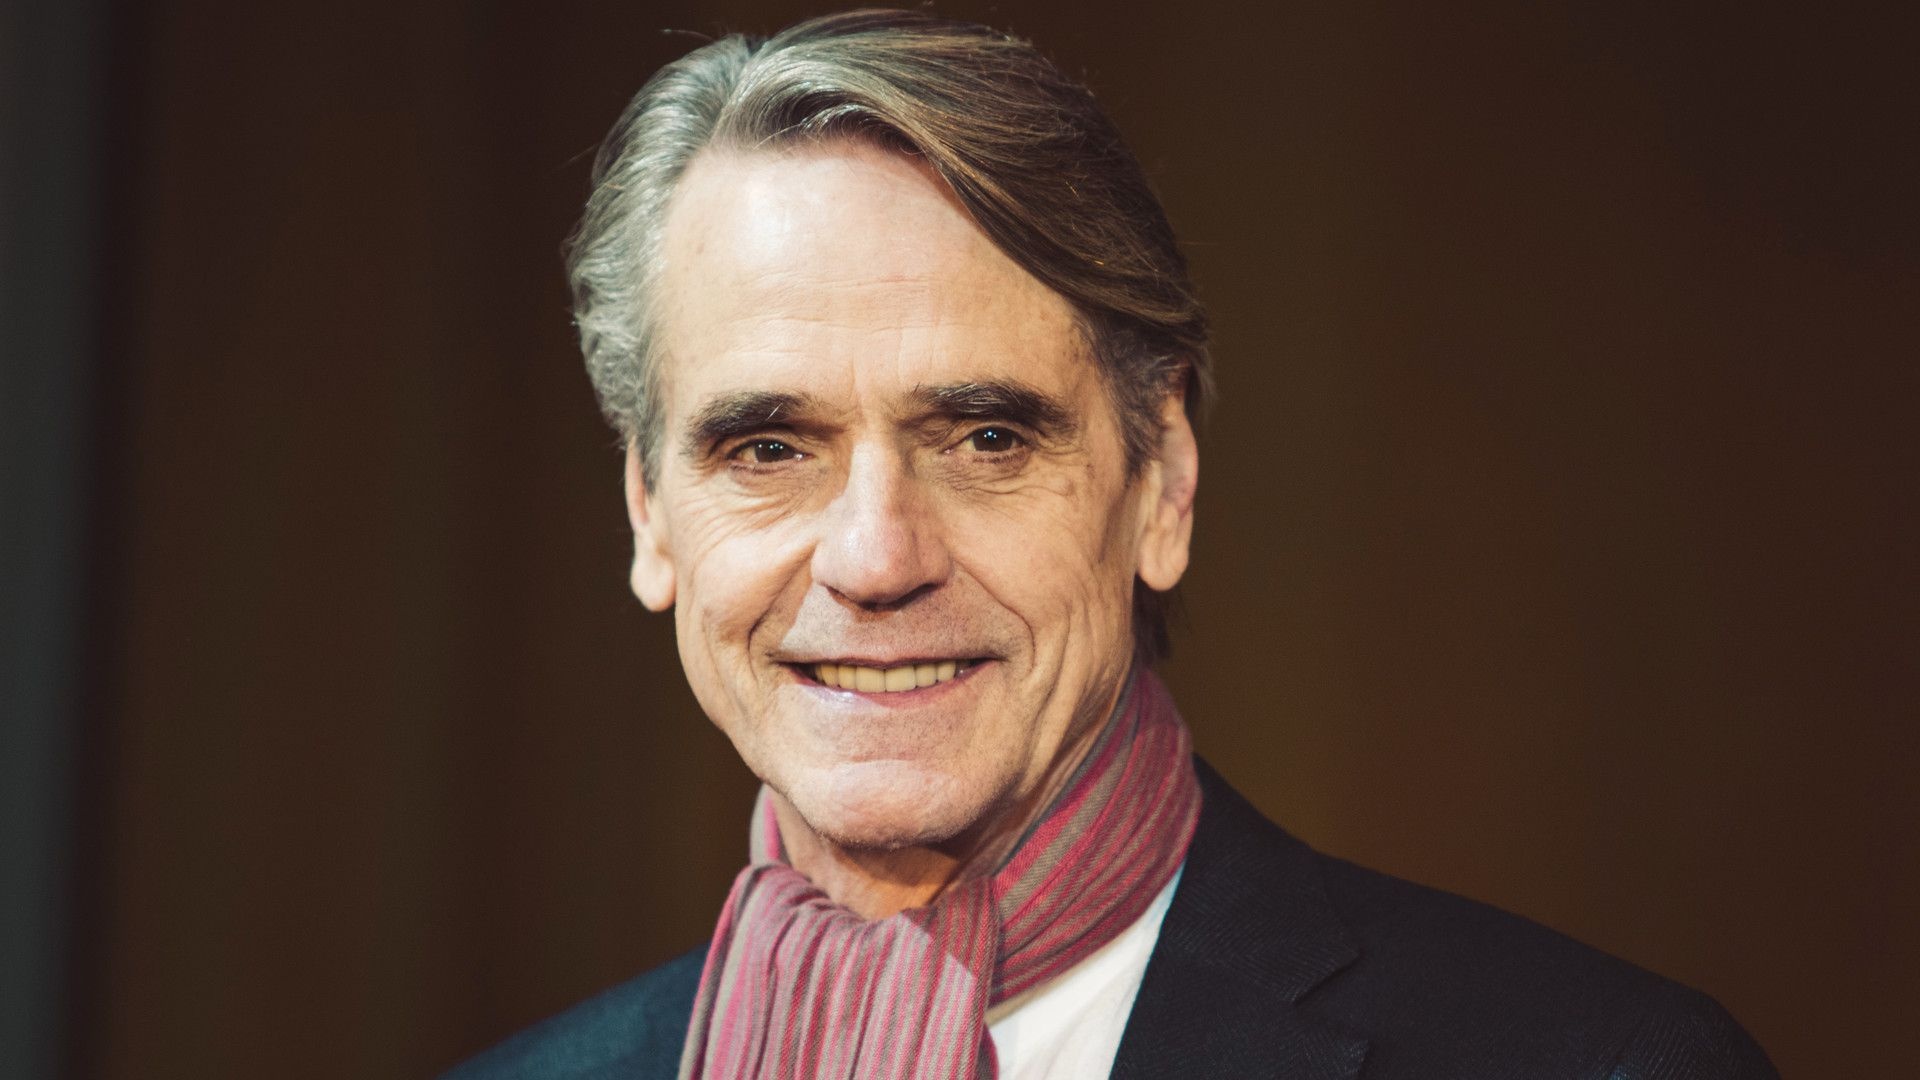 Jeremy Irons, Movies, Wallpapers, Pictures, 1920x1080 Full HD Desktop